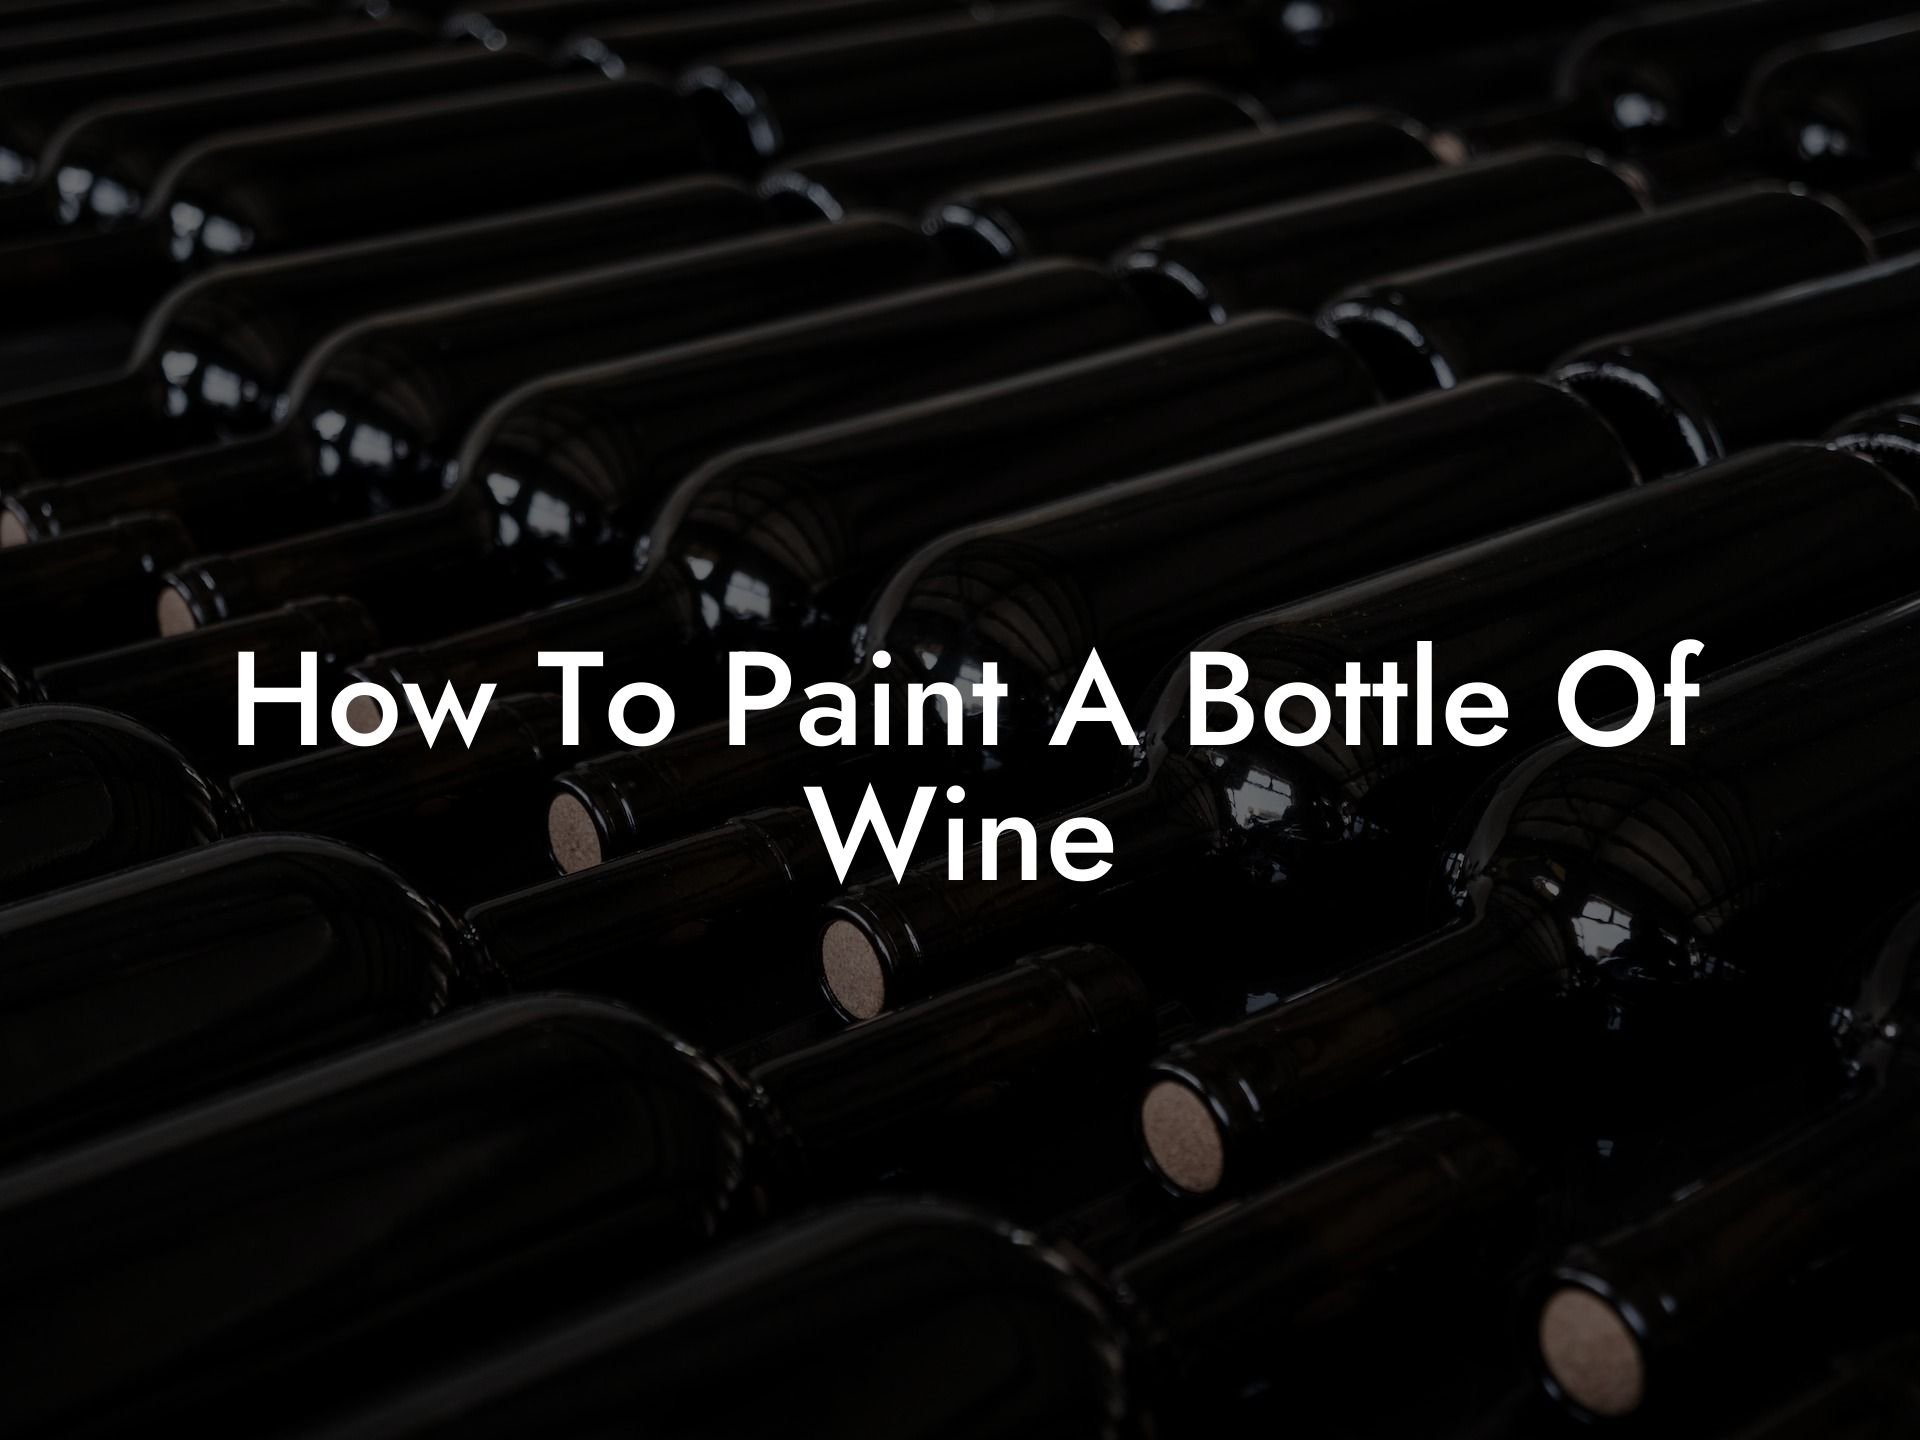 How To Paint A Bottle Of Wine